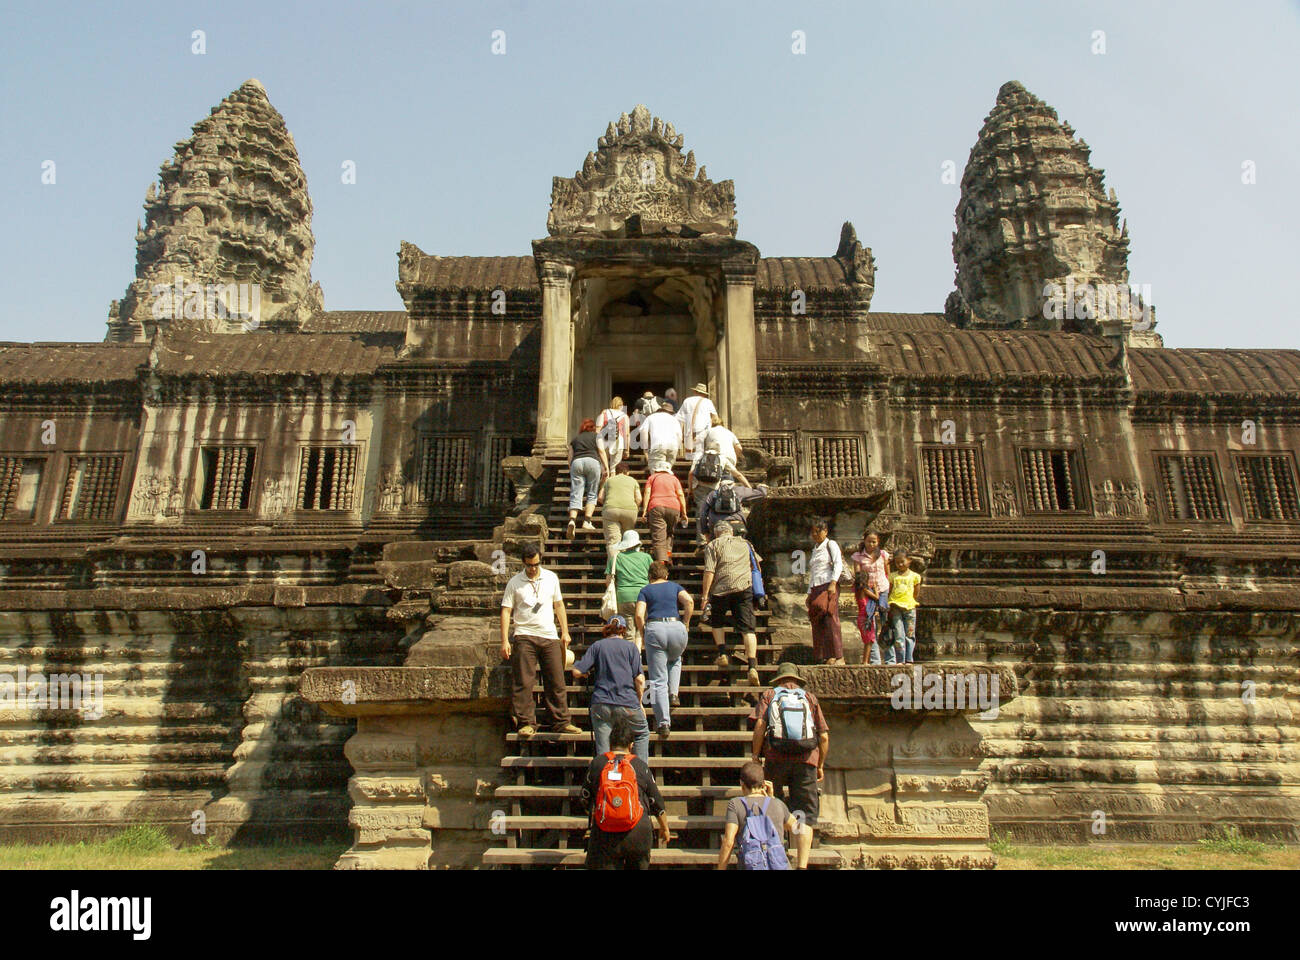 Cambodia, Angkor Wat The largest temple complex in the world Stock Photo